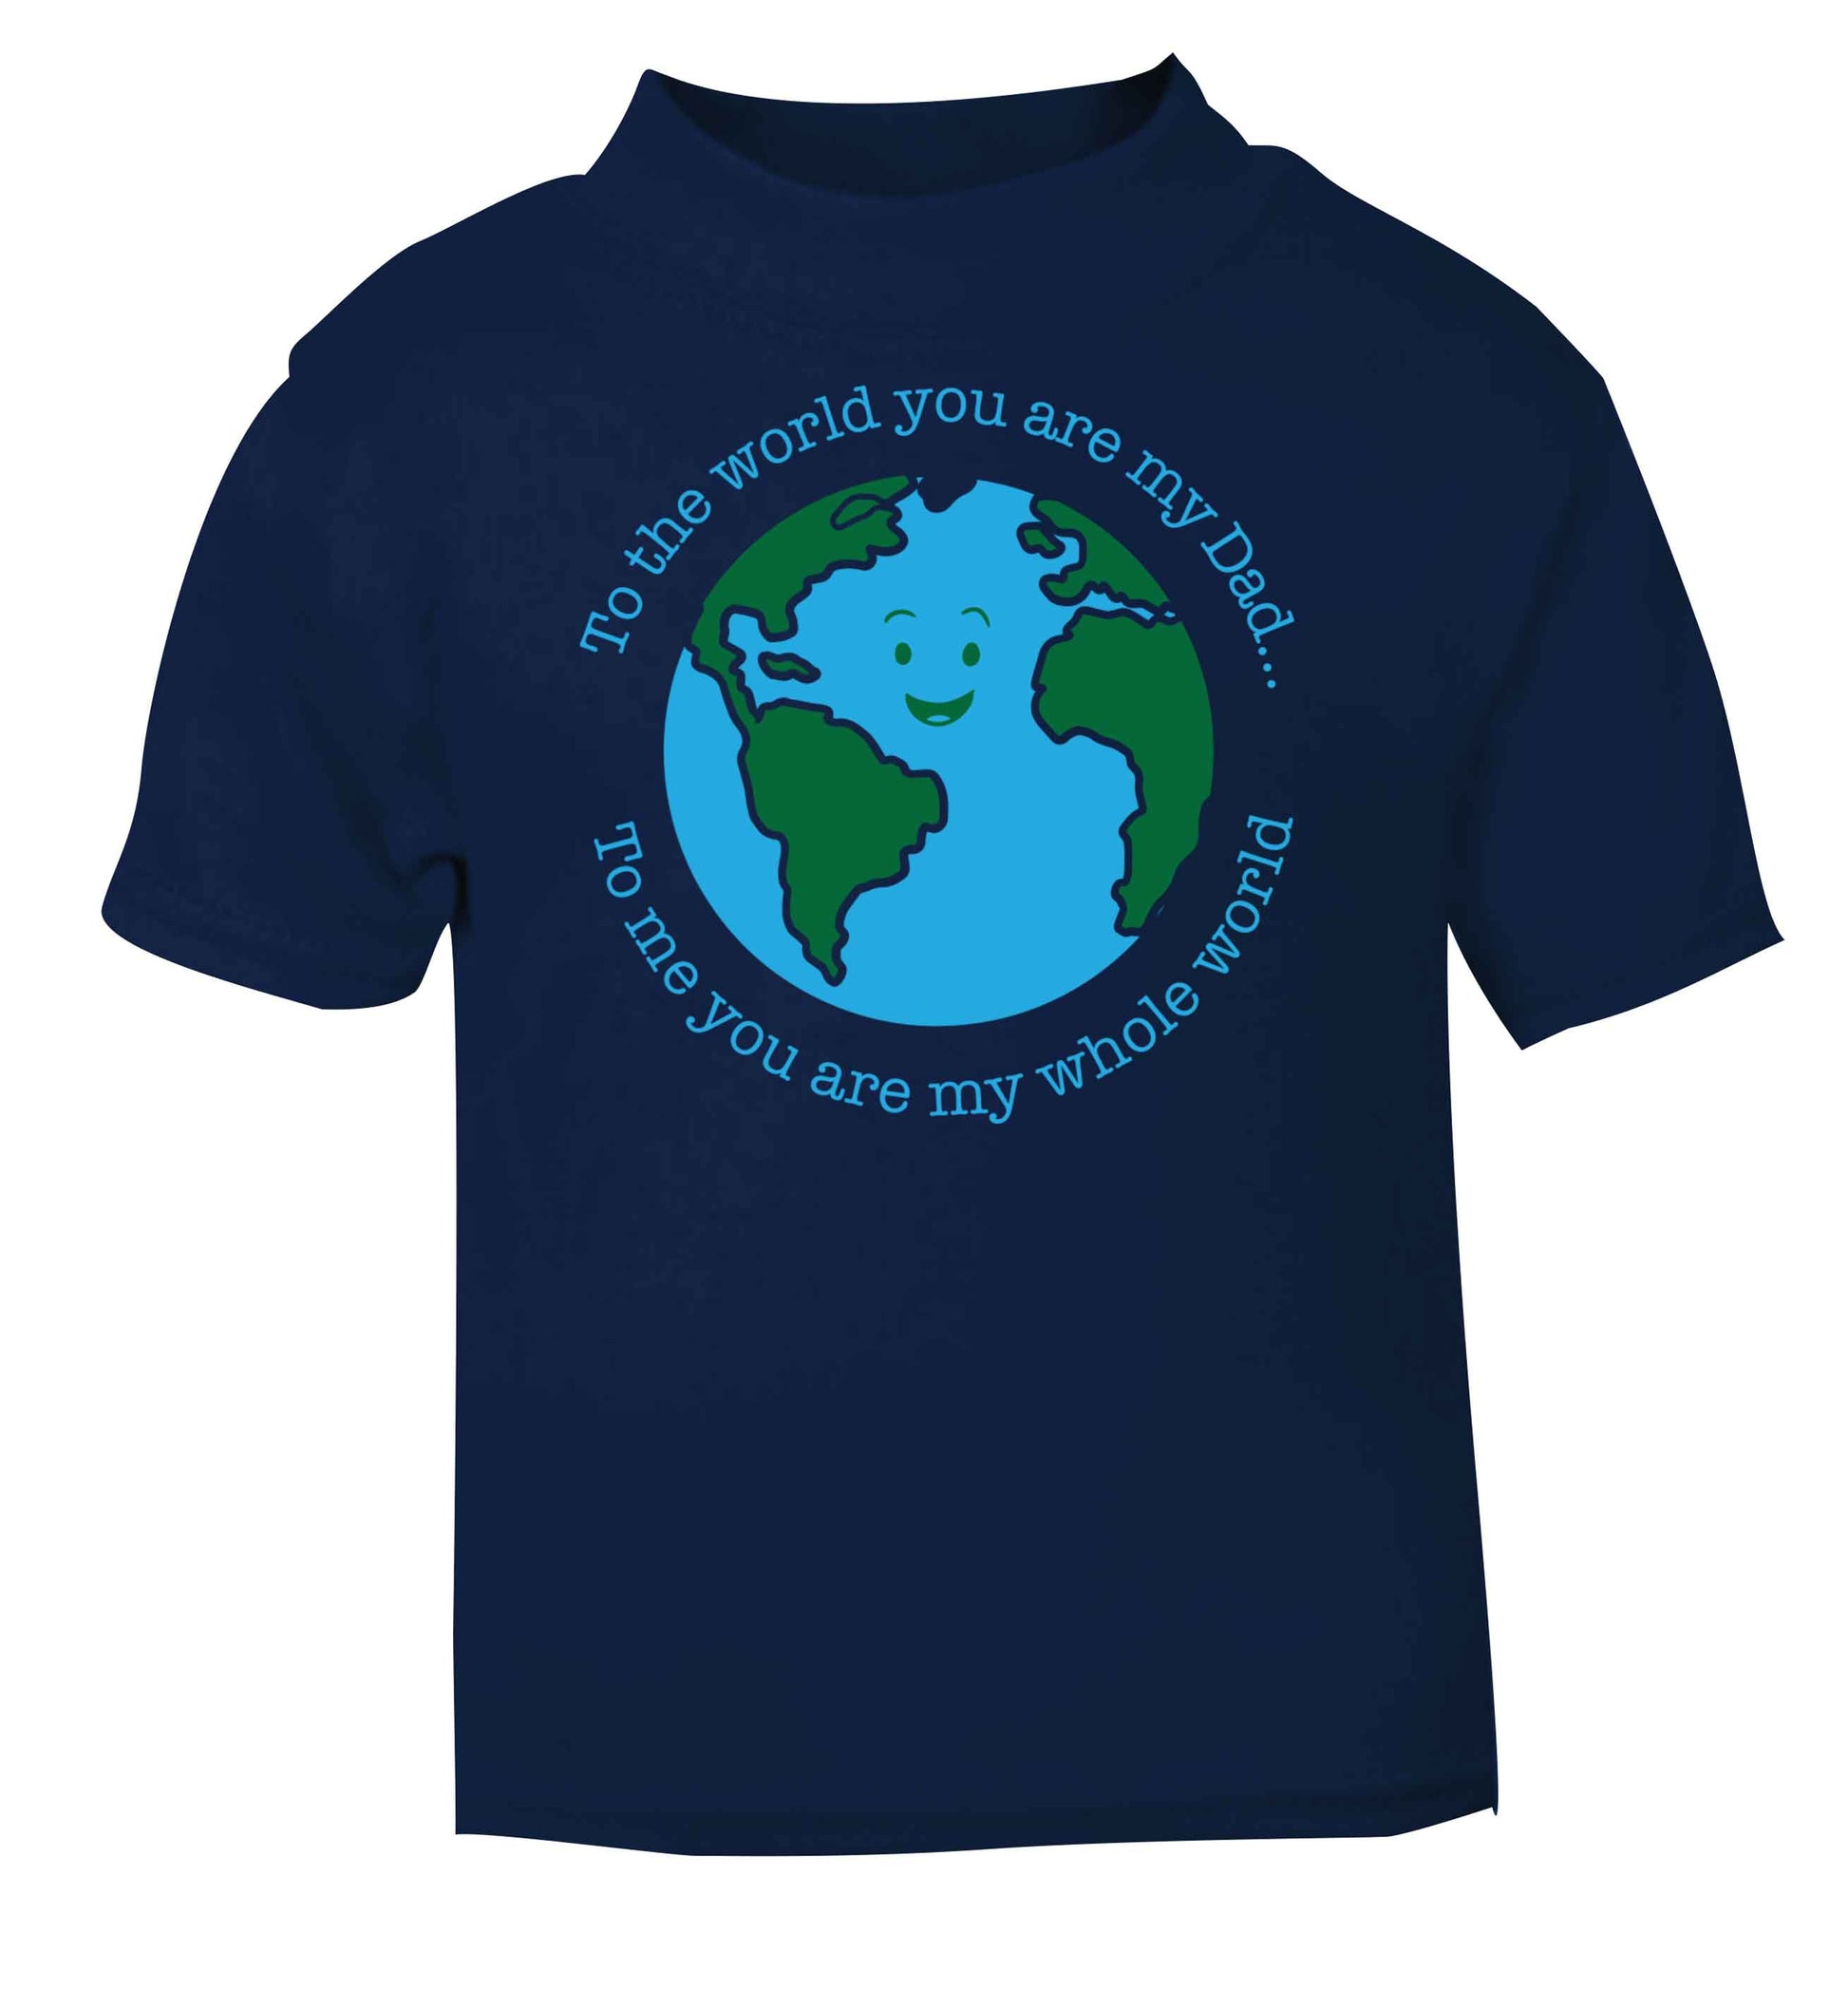 To the world you are my dad, to me you are my whole world navy baby toddler Tshirt 2 Years